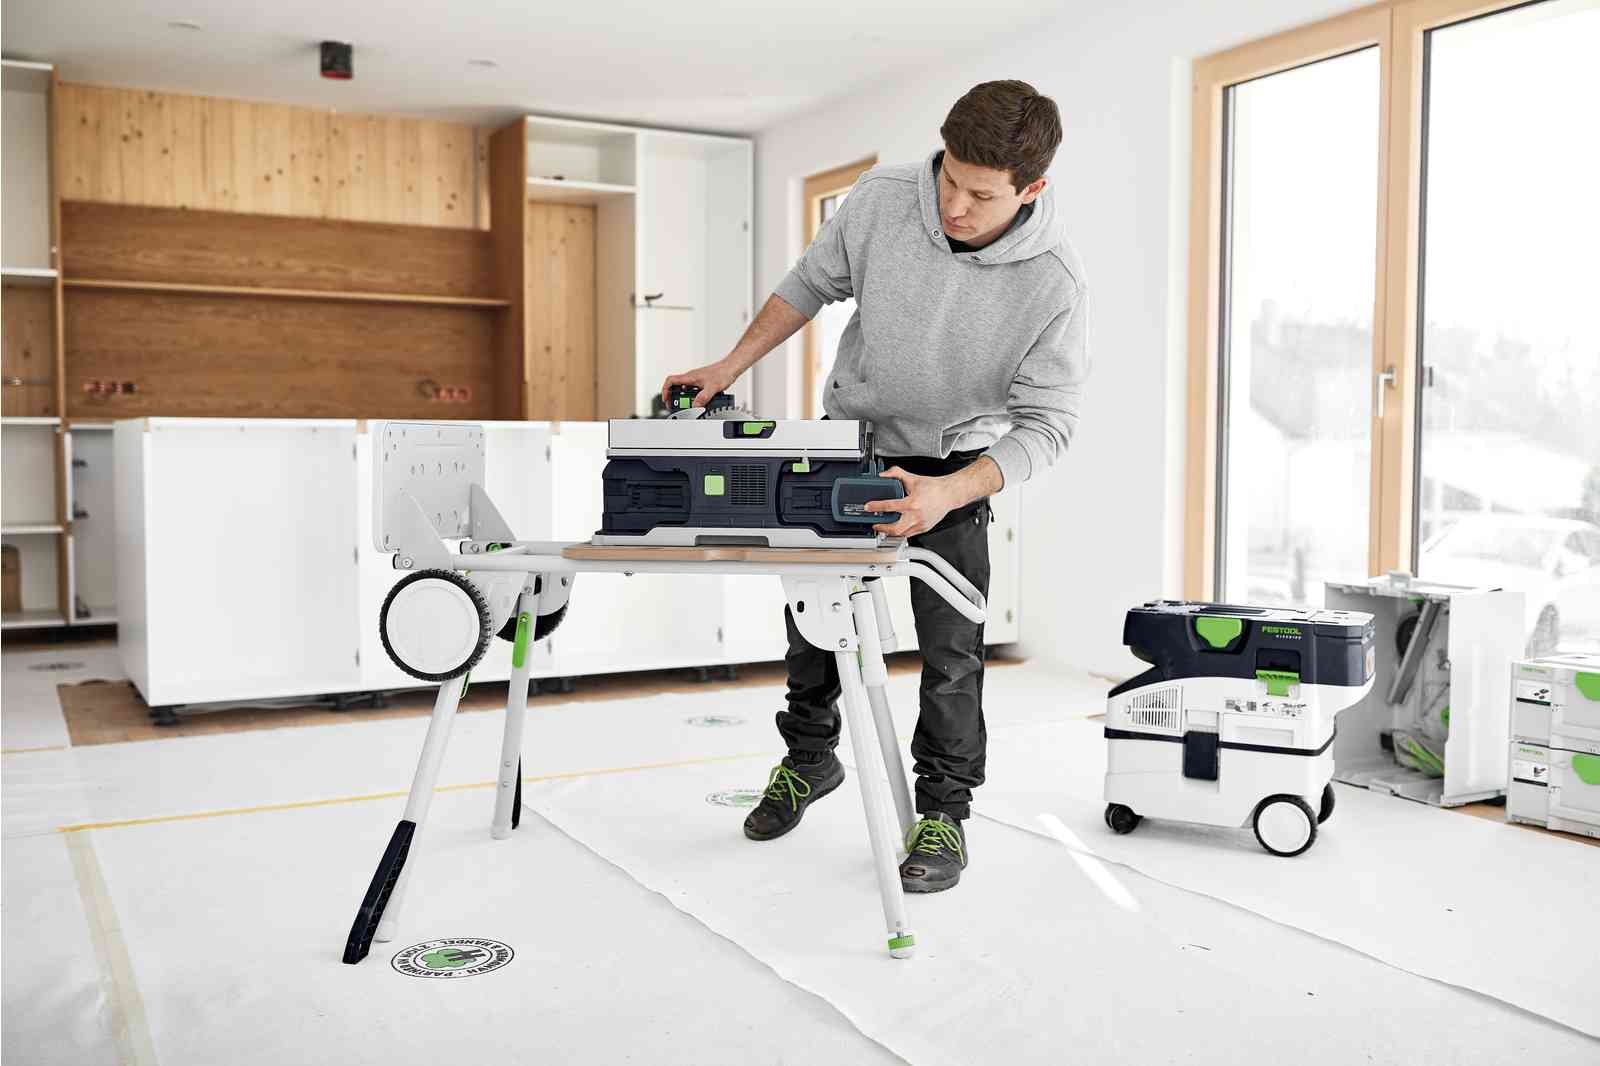 Festool Launches Systainer Systems Collection From: Festool